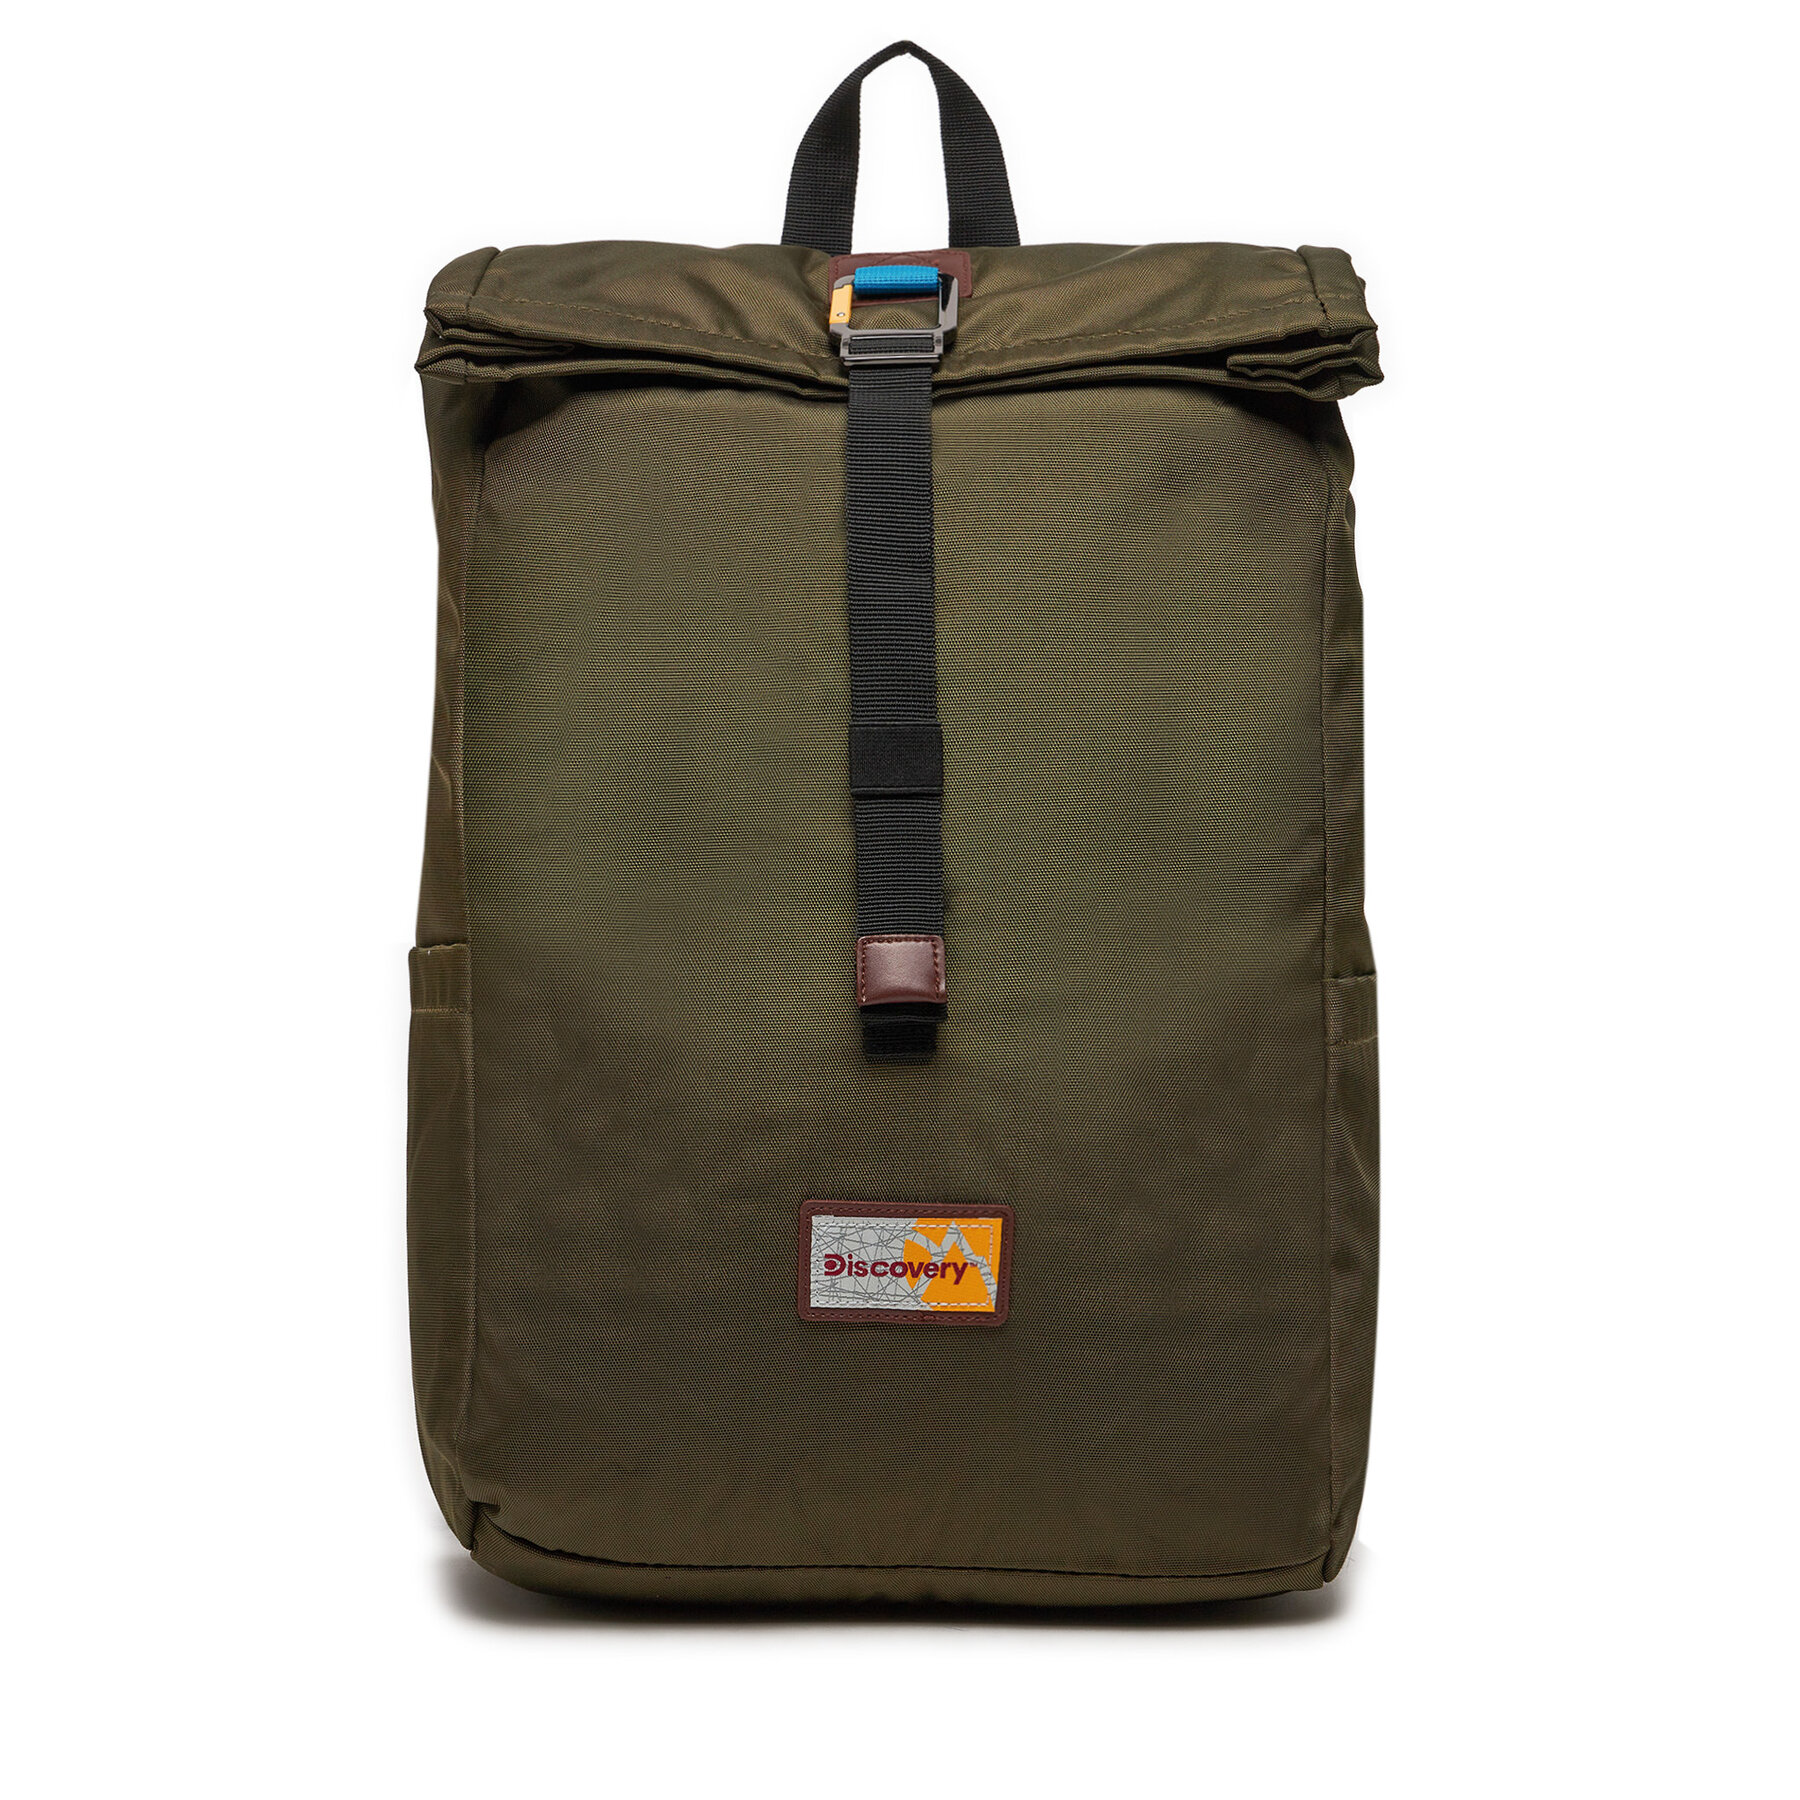 Rucksack Discovery Roll Top Backpack D00722.11 Khakifarben von Discovery